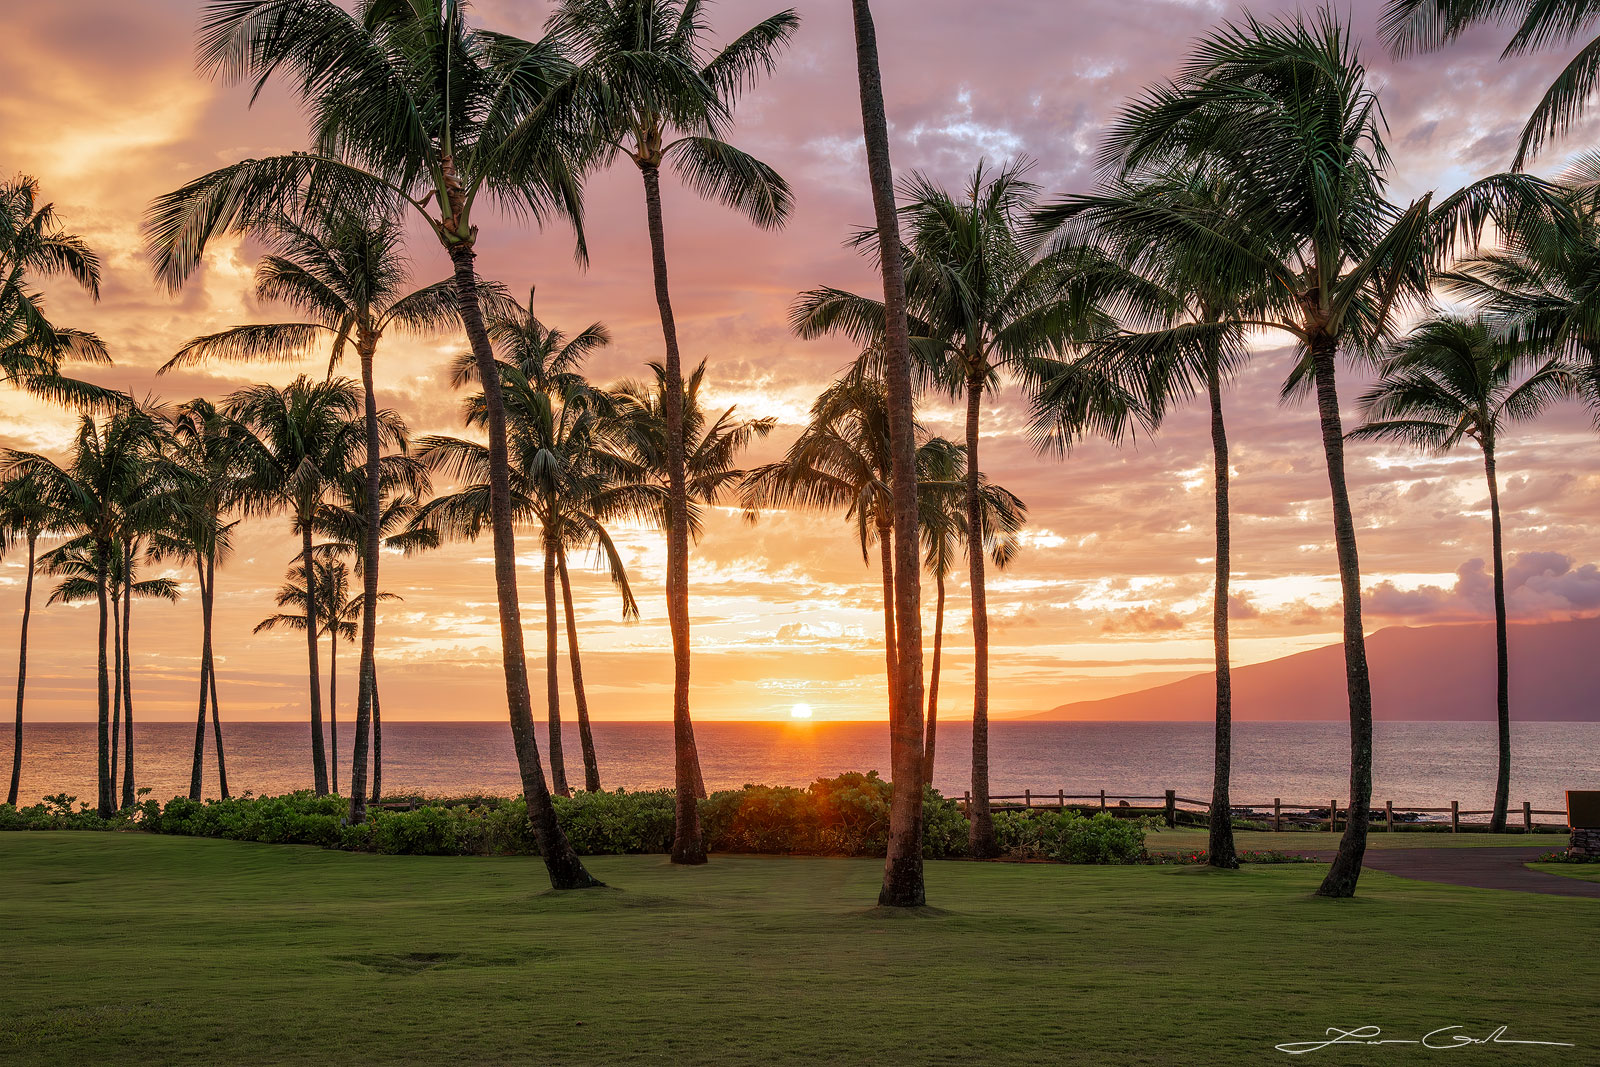 Fine art photo featuring a palm tree-populated grass field on the shore of Maui, under a vibrant sky filled with clouds and painted with hues of orange and pink by the setting sun - Gintchin Fine Art.